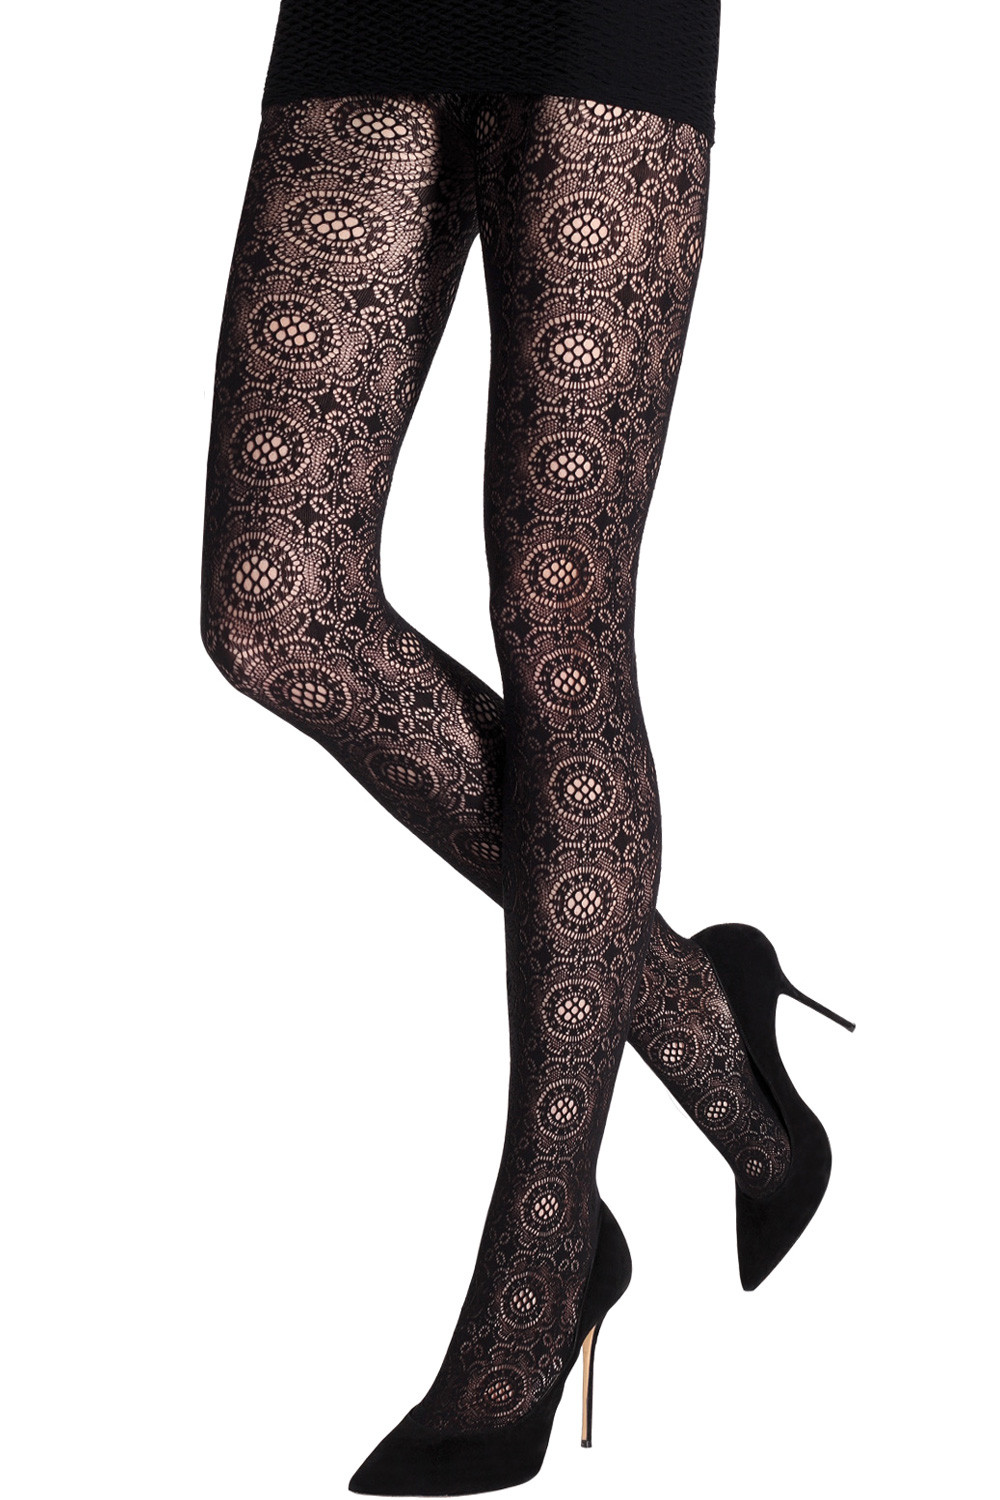 Lace Tights, Timeless Styles, Women